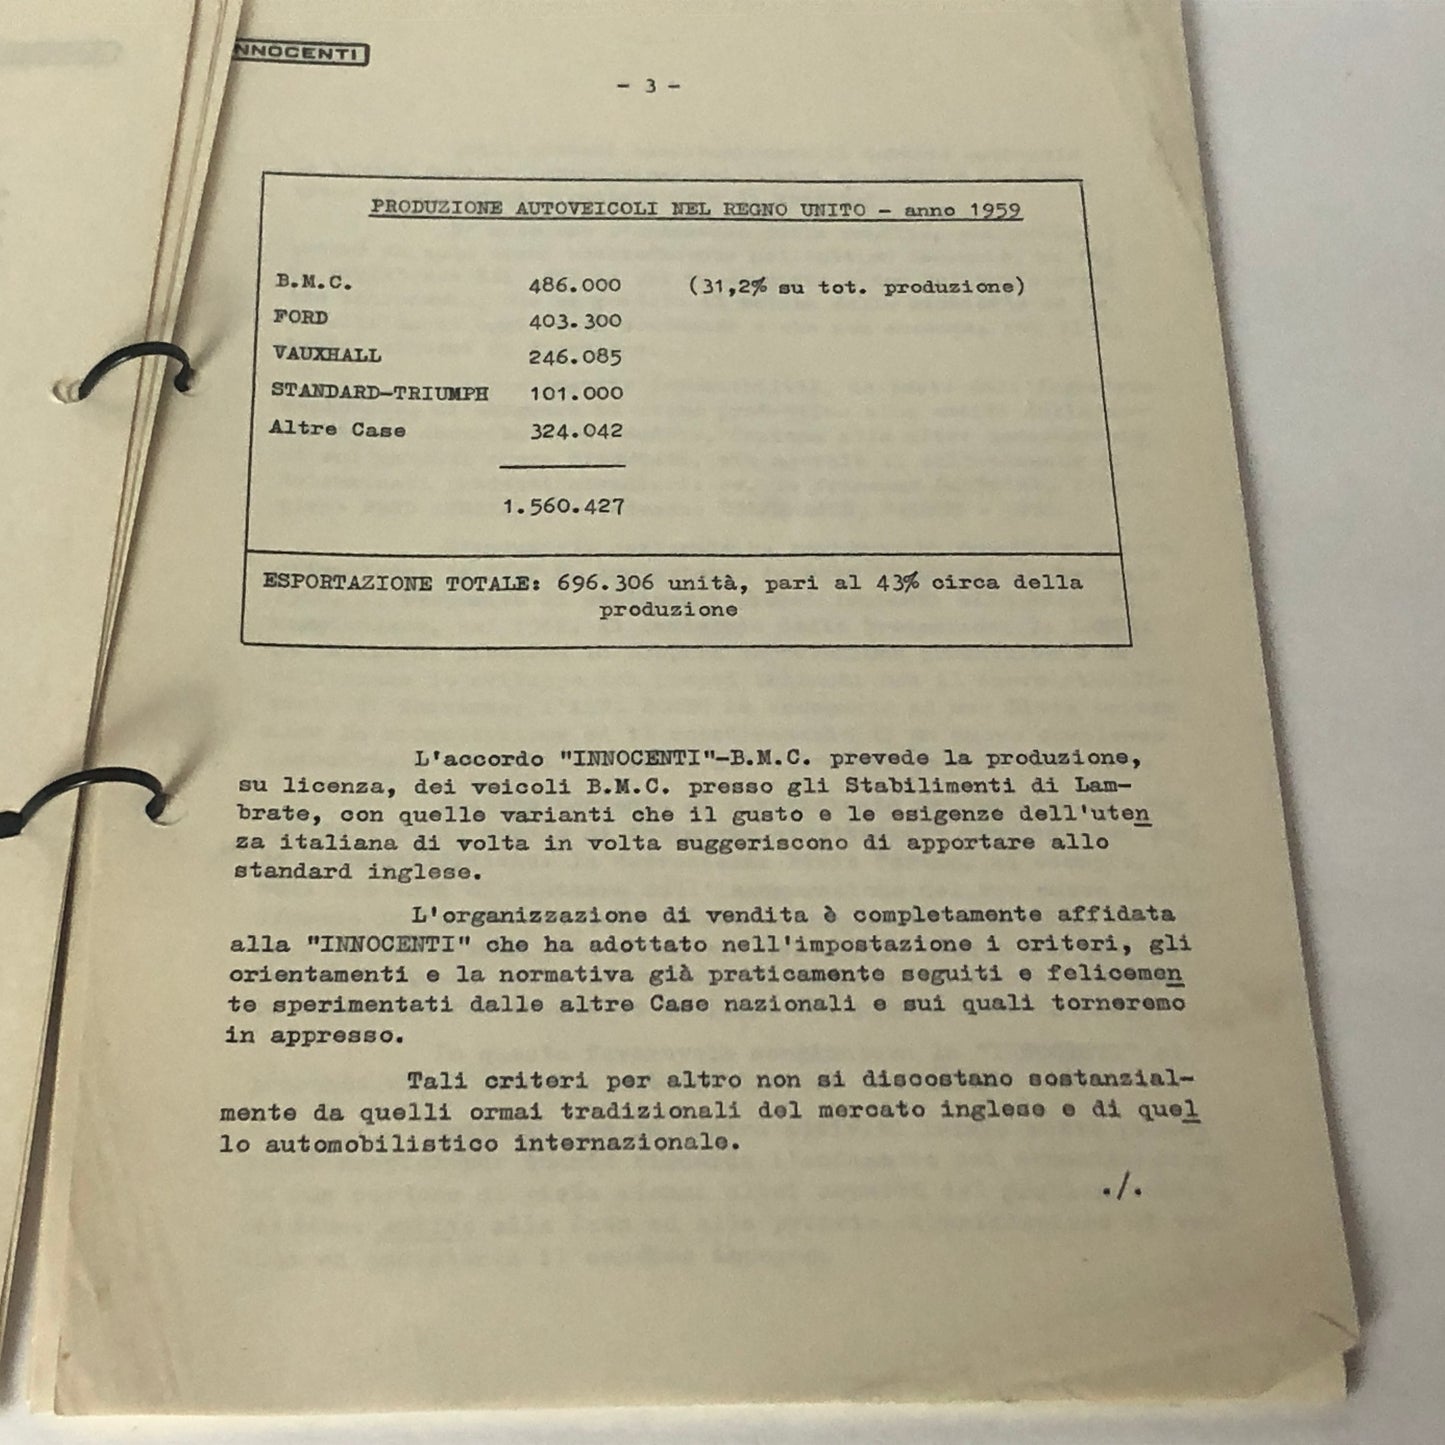 Innocenti, Commercial Regulations for the Sale of Motor Vehicles Reserved for Innocenti Commission Agents